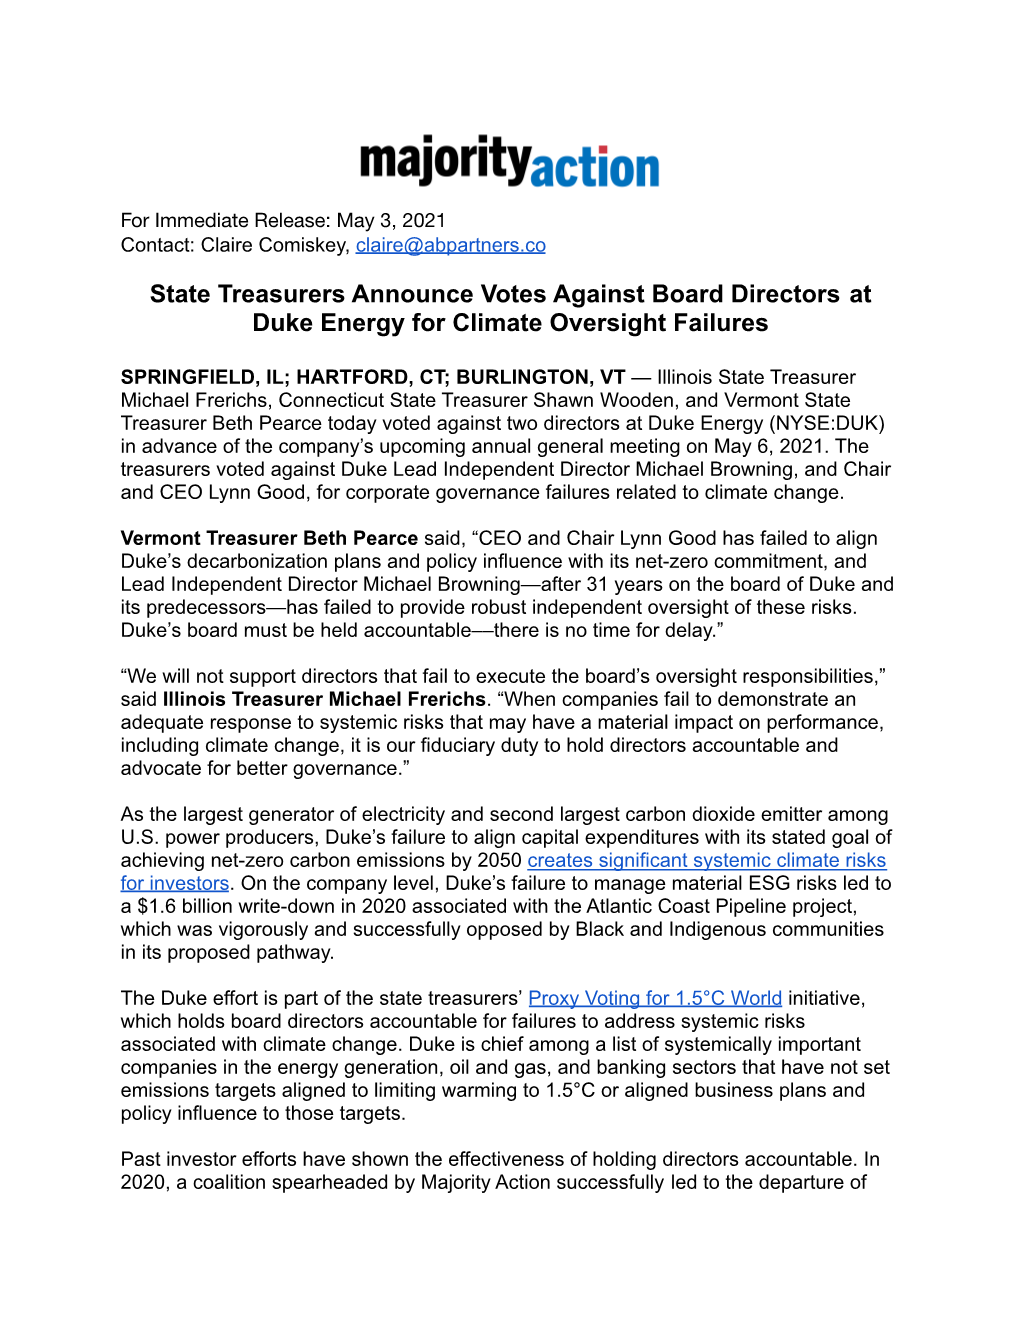 State Treasurers Announce Votes Against Board Directors at Duke Energy for Climate Oversight Failures